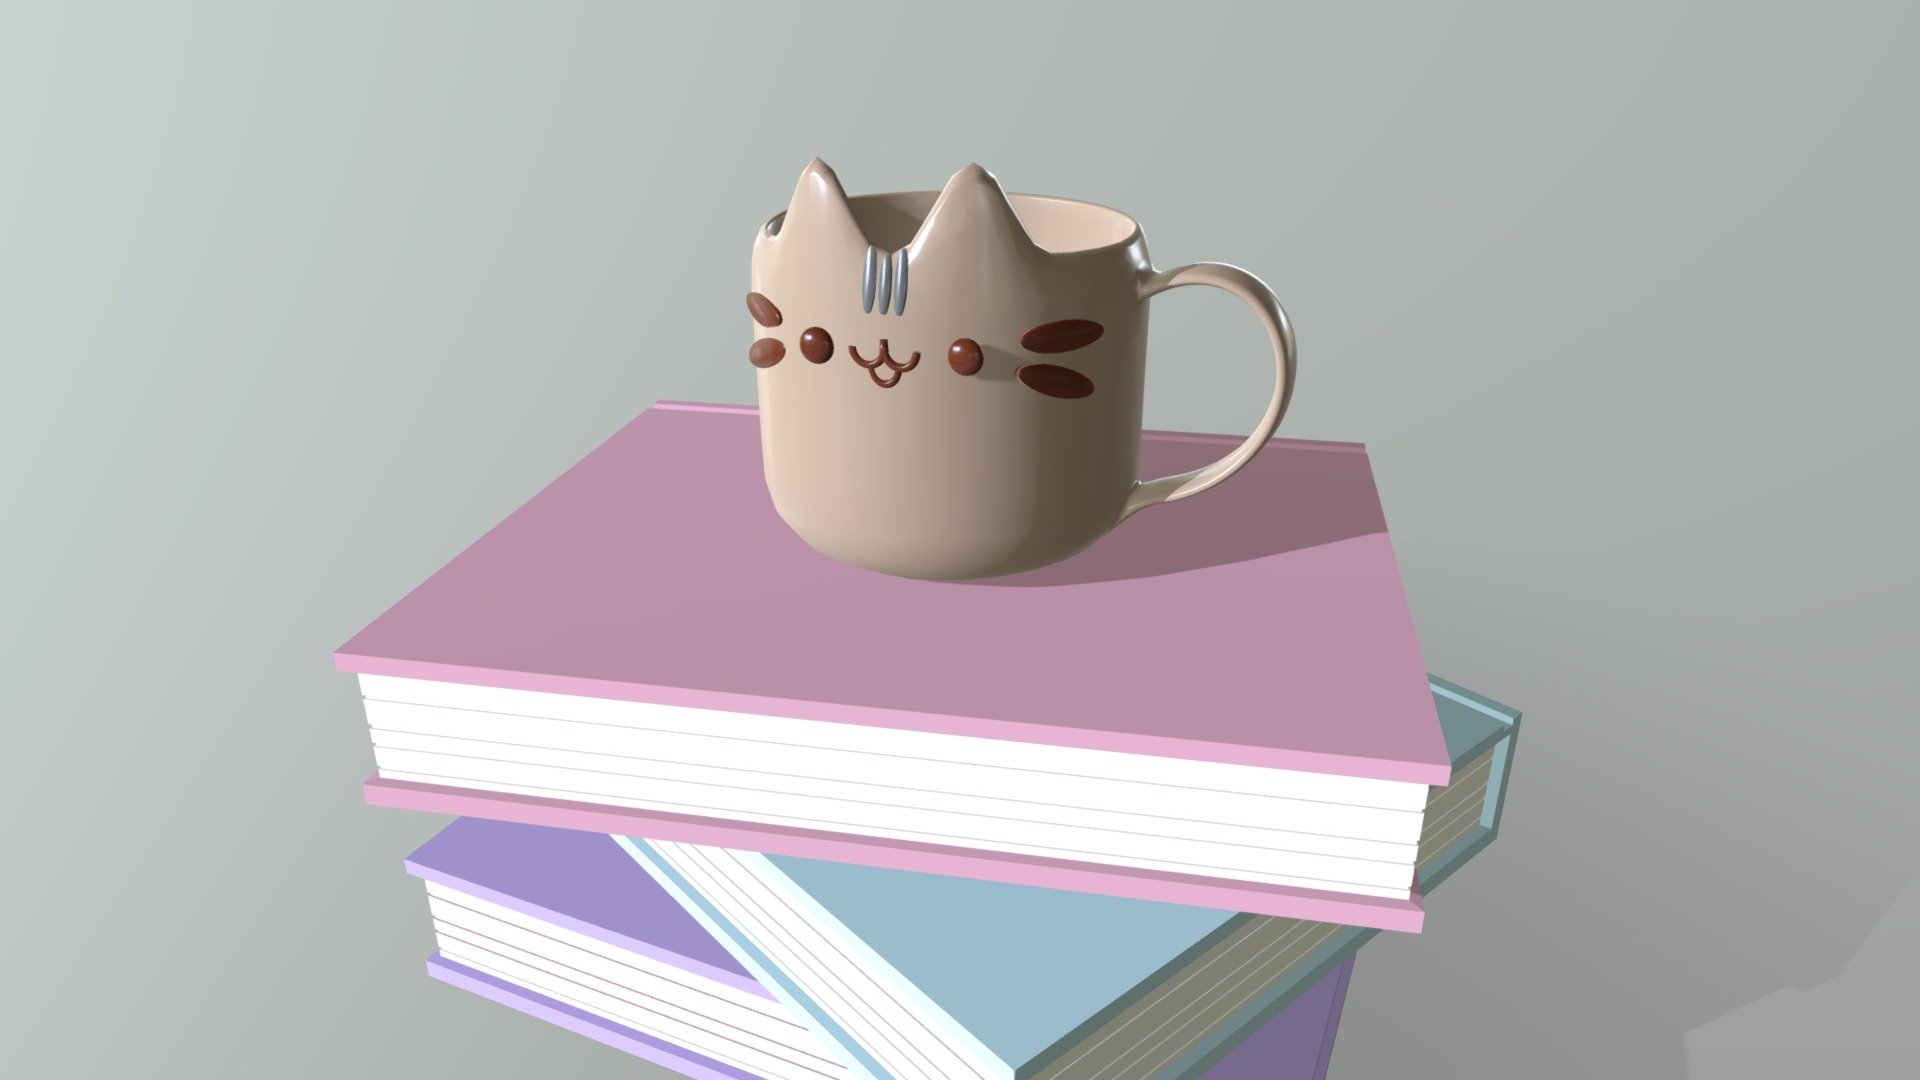 Pusheen themed coffee mug on a stack of pastel colored books - 3D Sketchbook 3 [Pusheen Mug on Stack of Books] - 3D model by StaticDisturbance 3d model